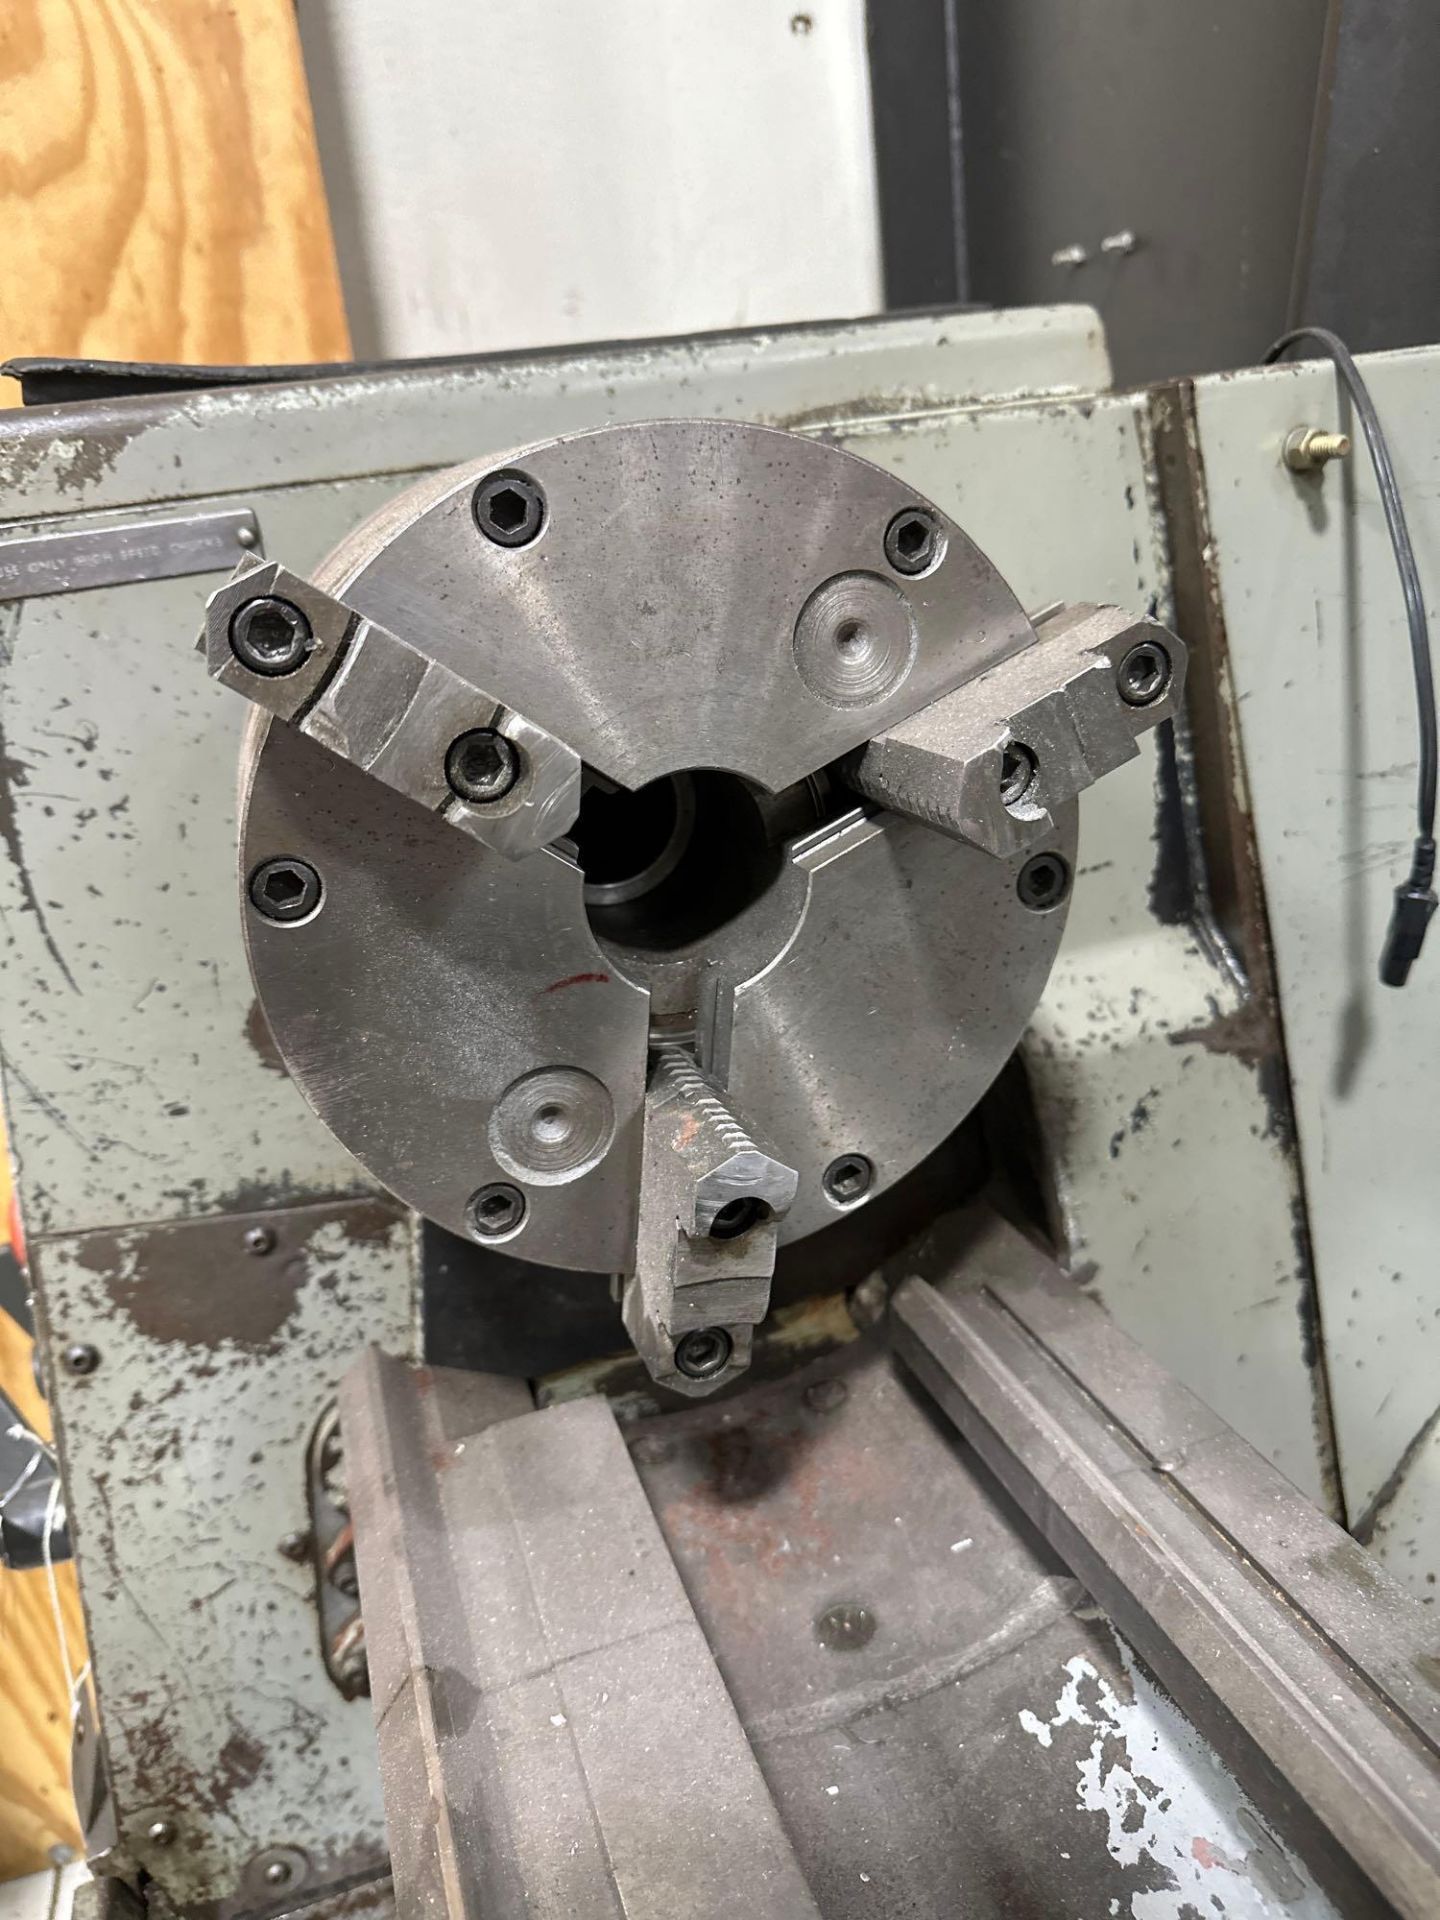 Clausing Cochester Lathe, 8" 3-Jaw Chuck, 2" Spindle Bore, 41" Distance Between Center - Image 4 of 7